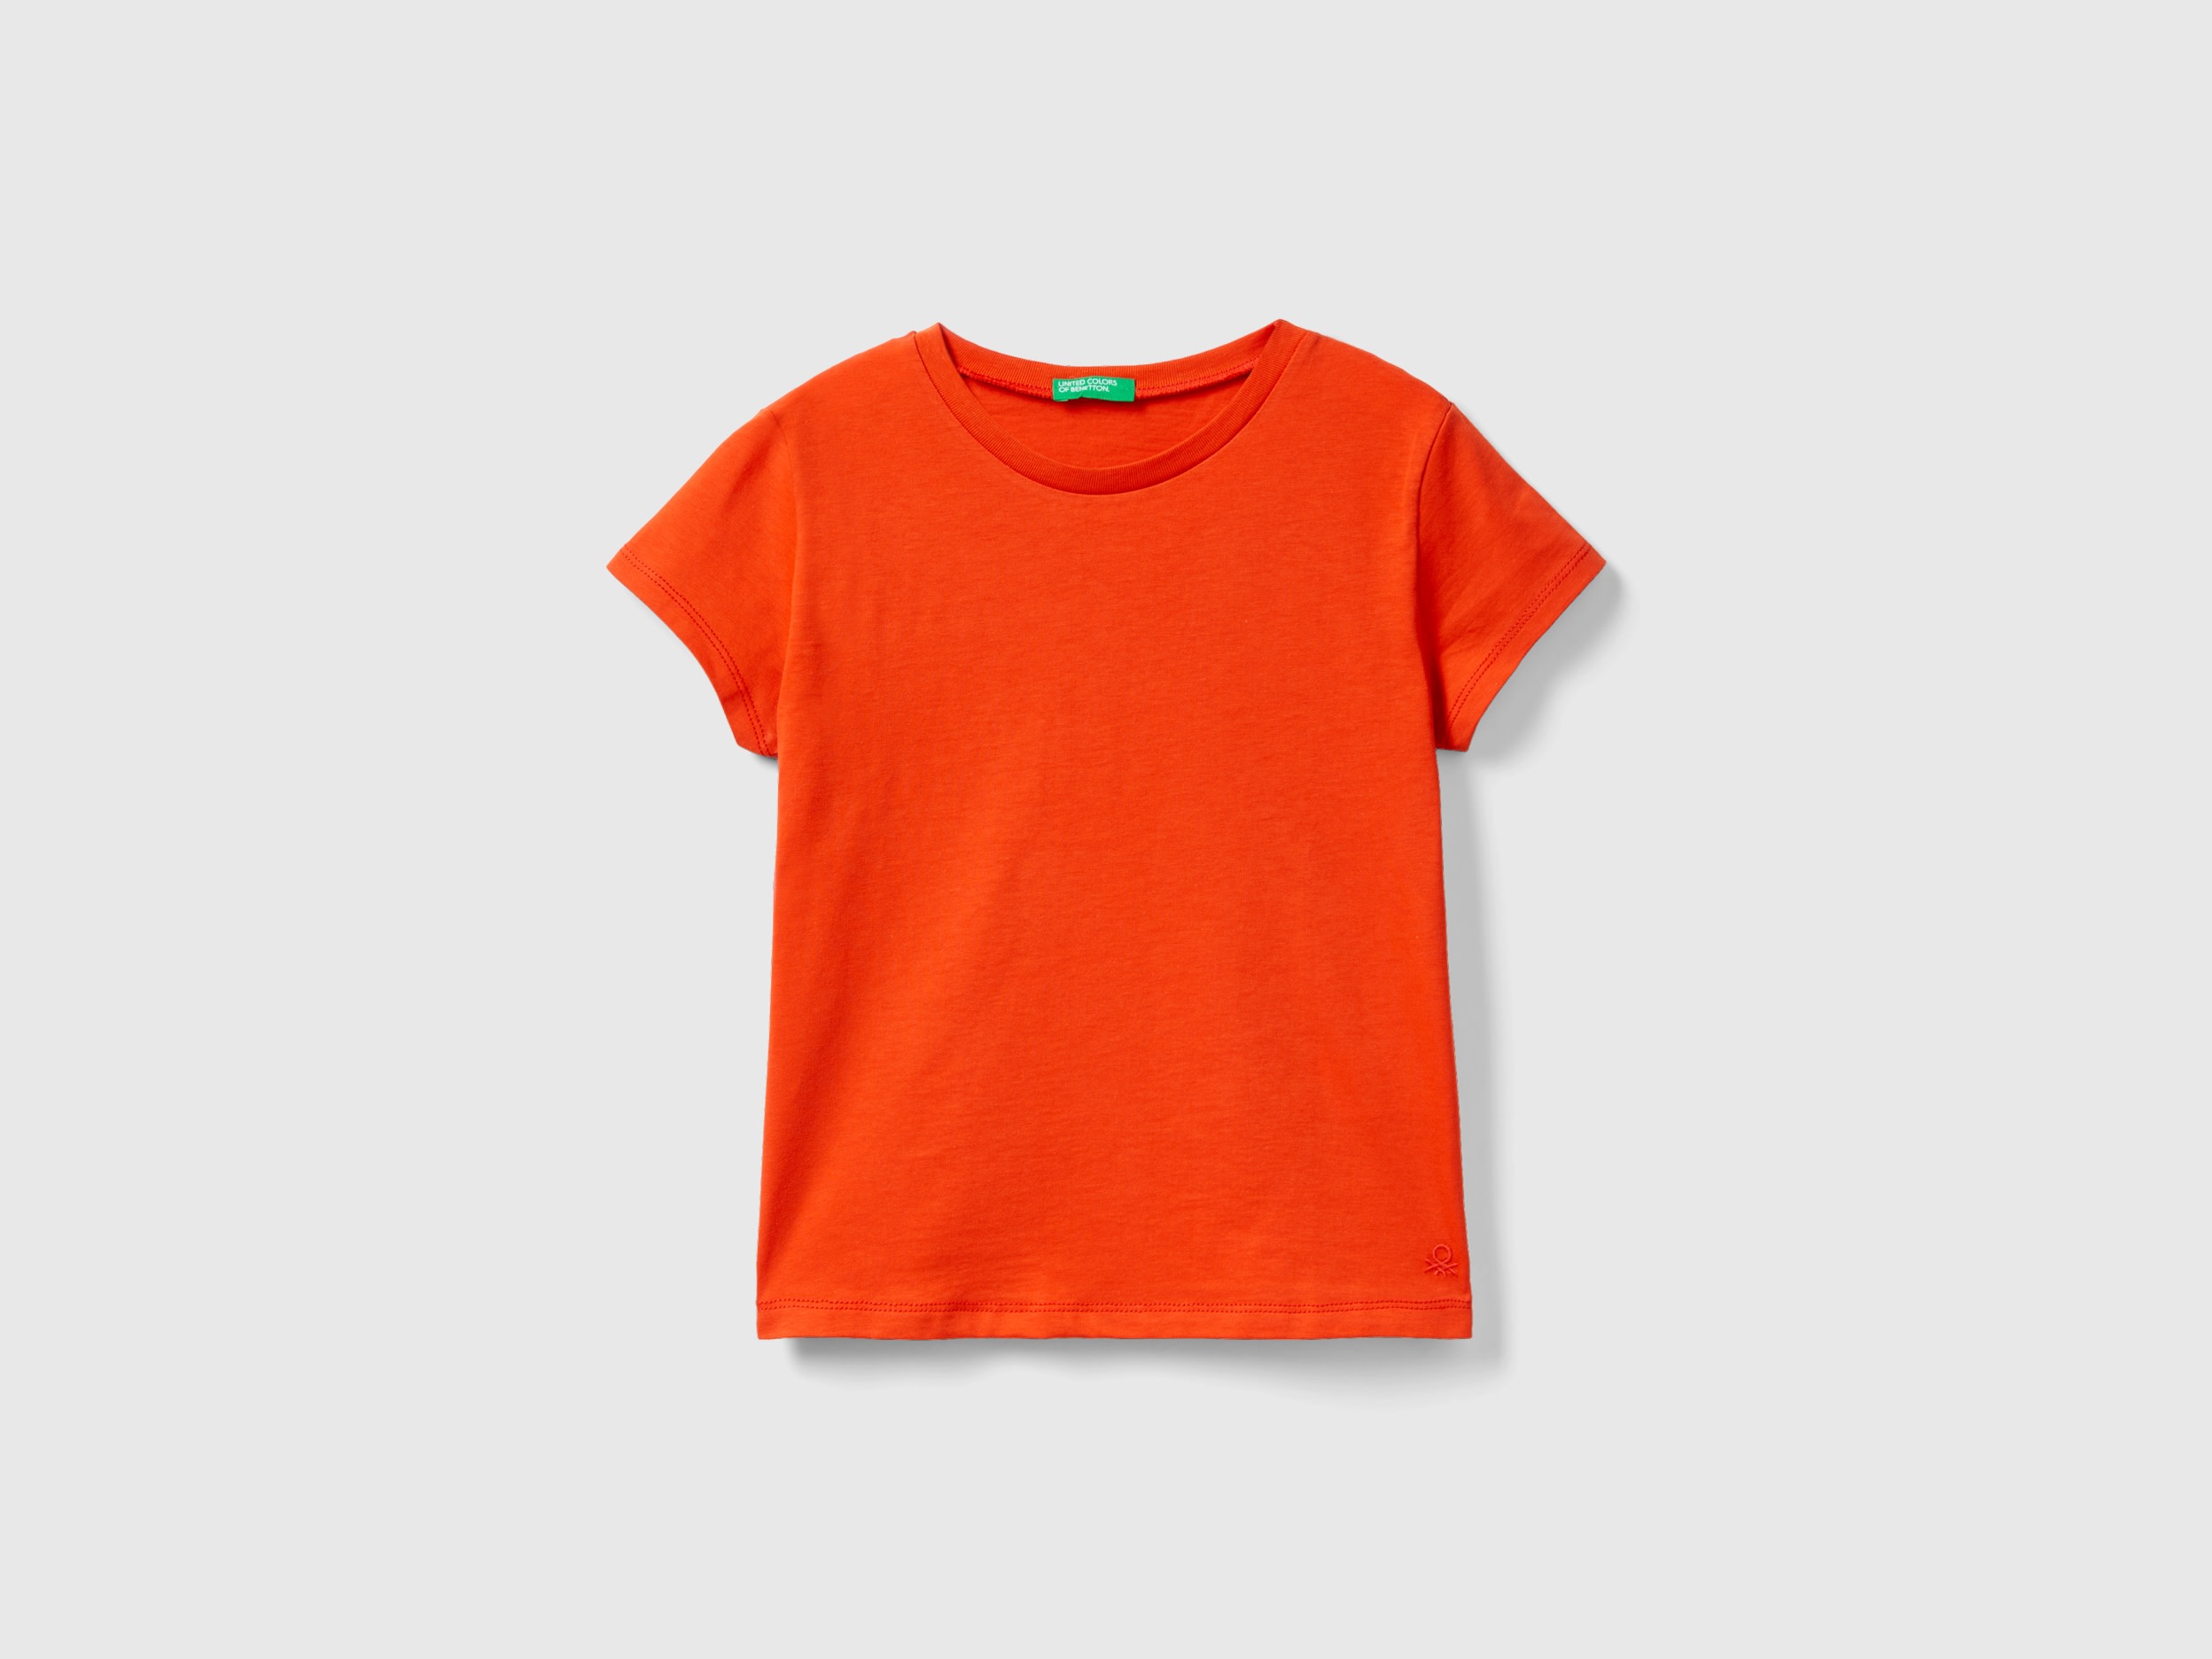 Benetton, T-shirt In Pure Organic Cotton, size 3XL, Red, Kids